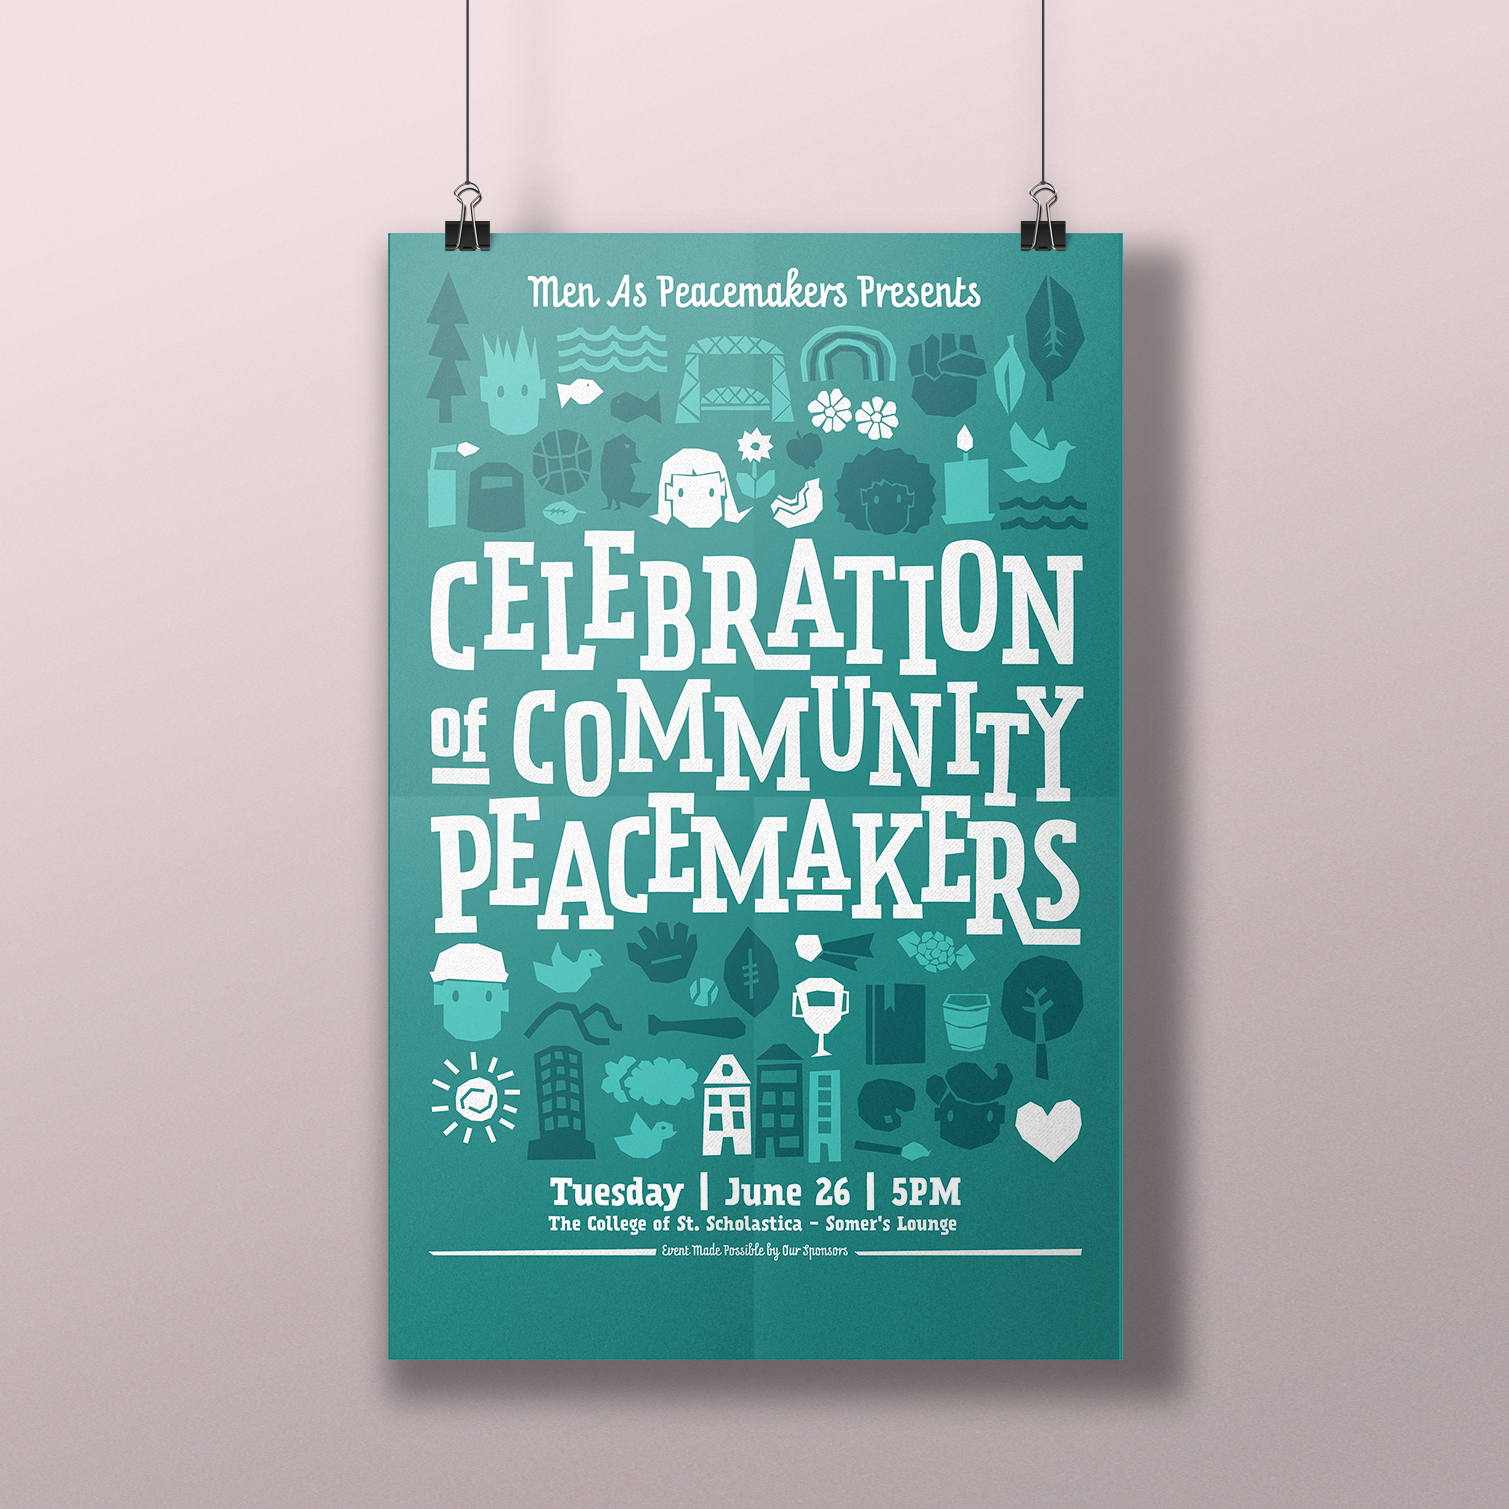 Celebration of Community Peacemakers 2018